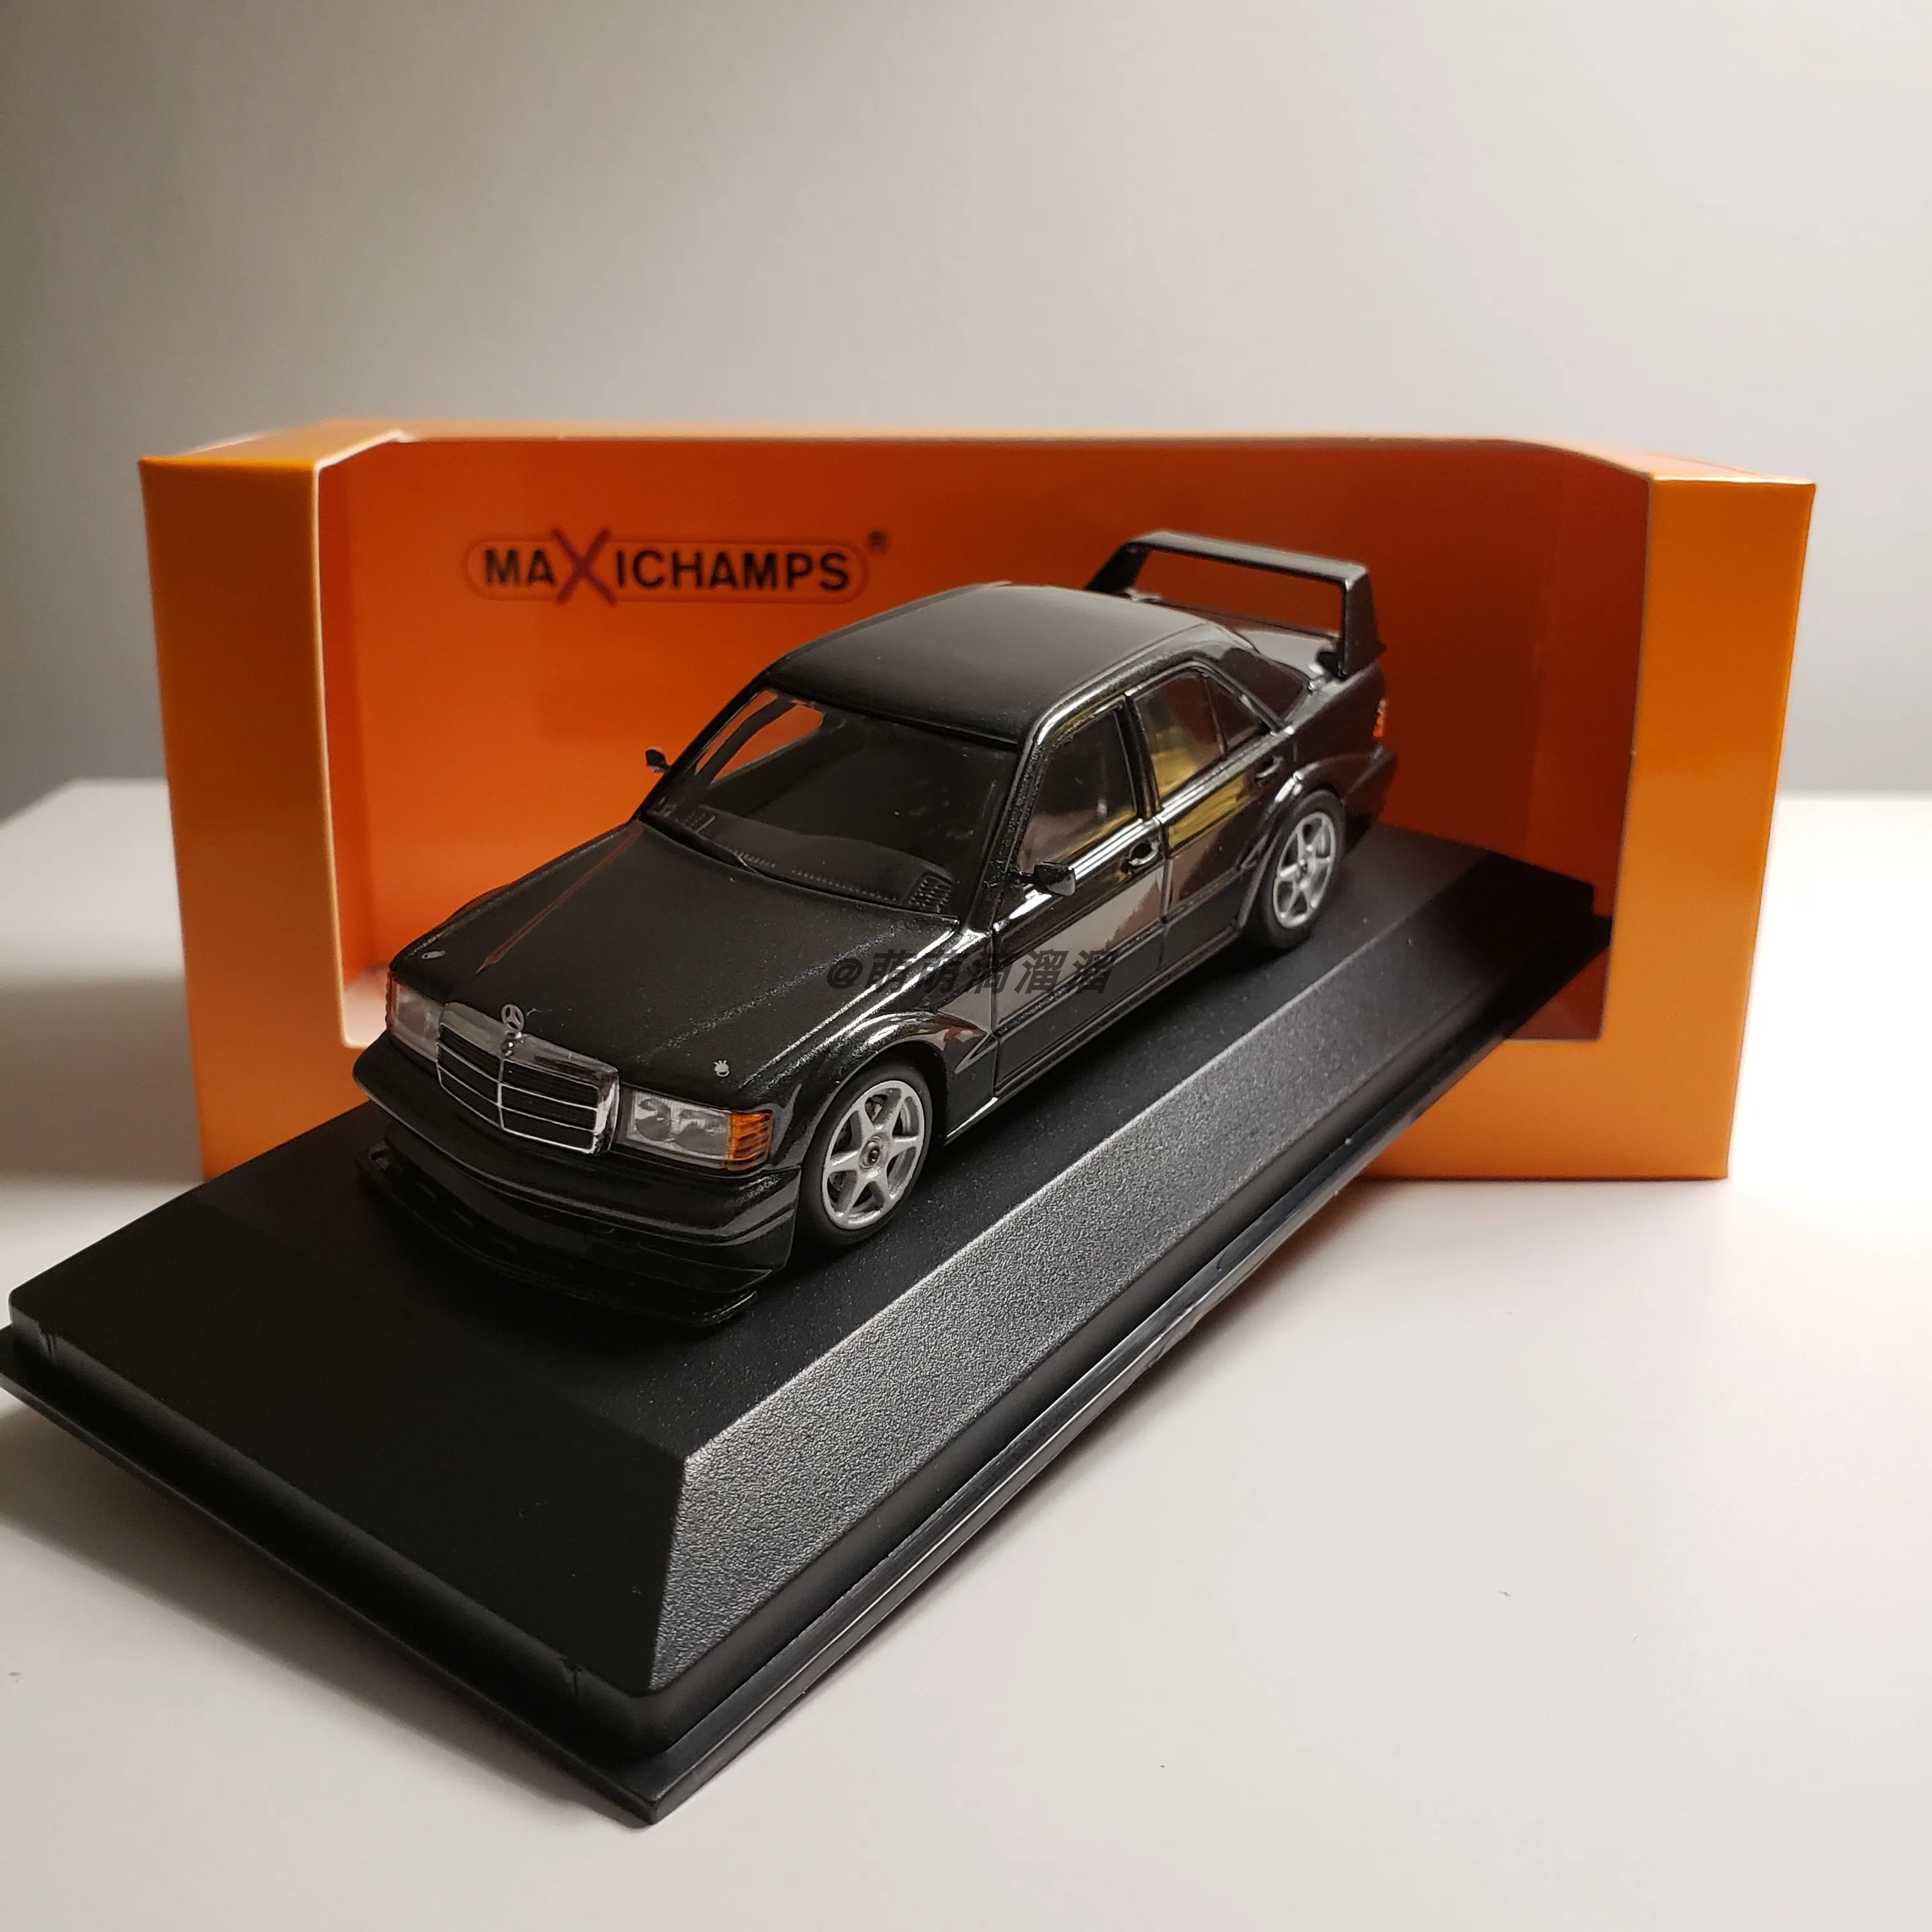 

Minichamps 1/43 BENZs 190E EVO II 2.5-16 Limited Collector Edition Metal Diecast Model Toy Gift